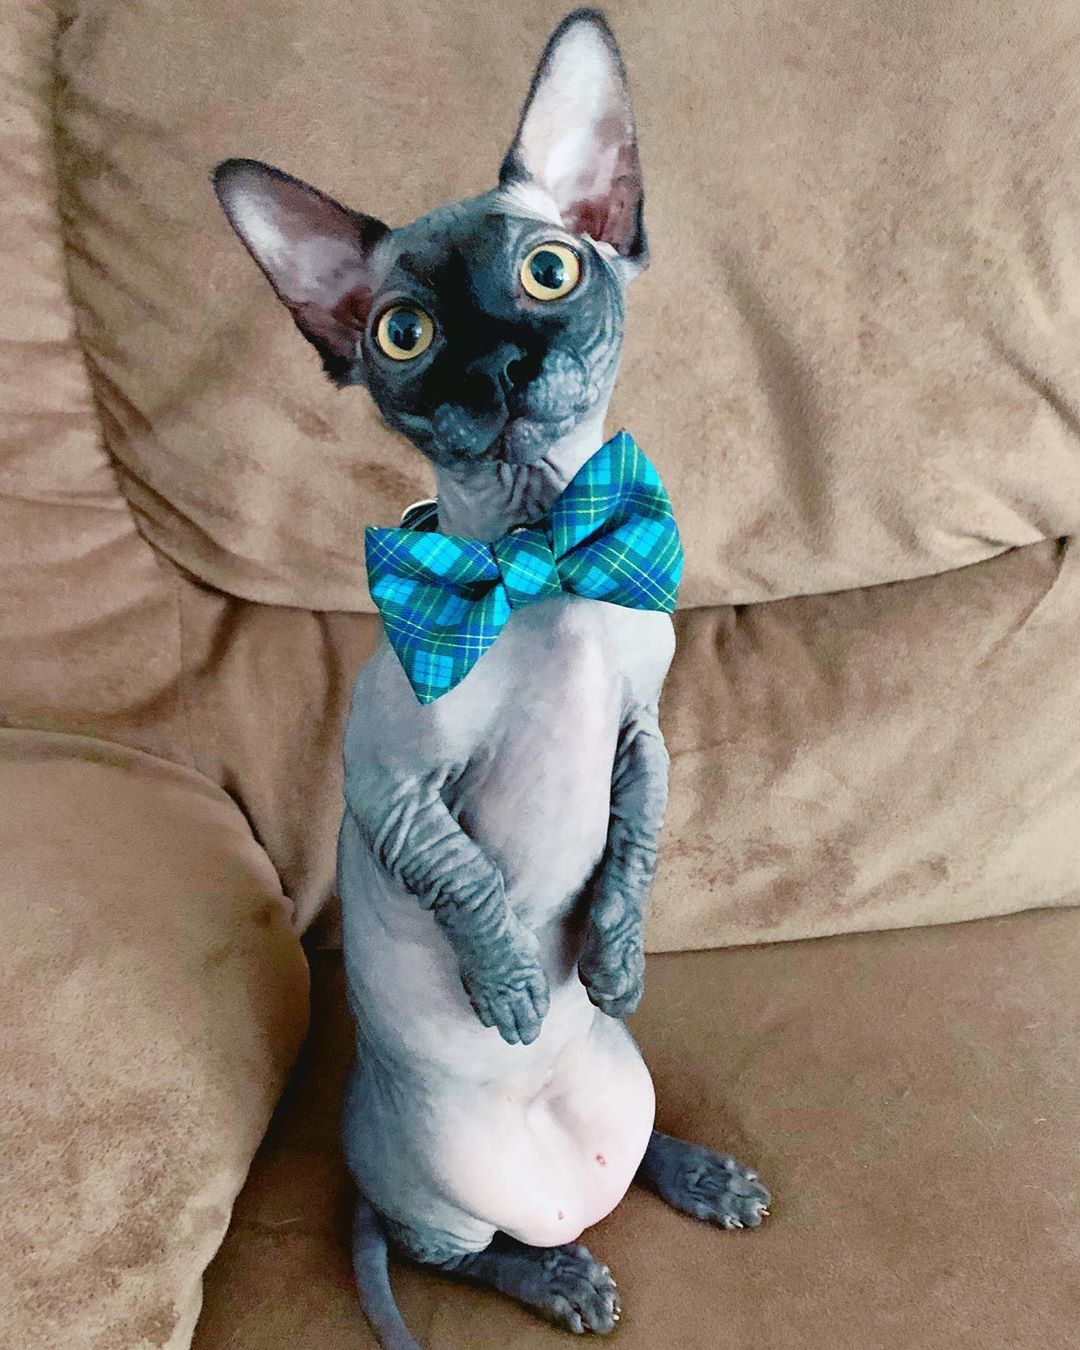 Sphynx Cat wearing a ribbon tie while sitting on the couch